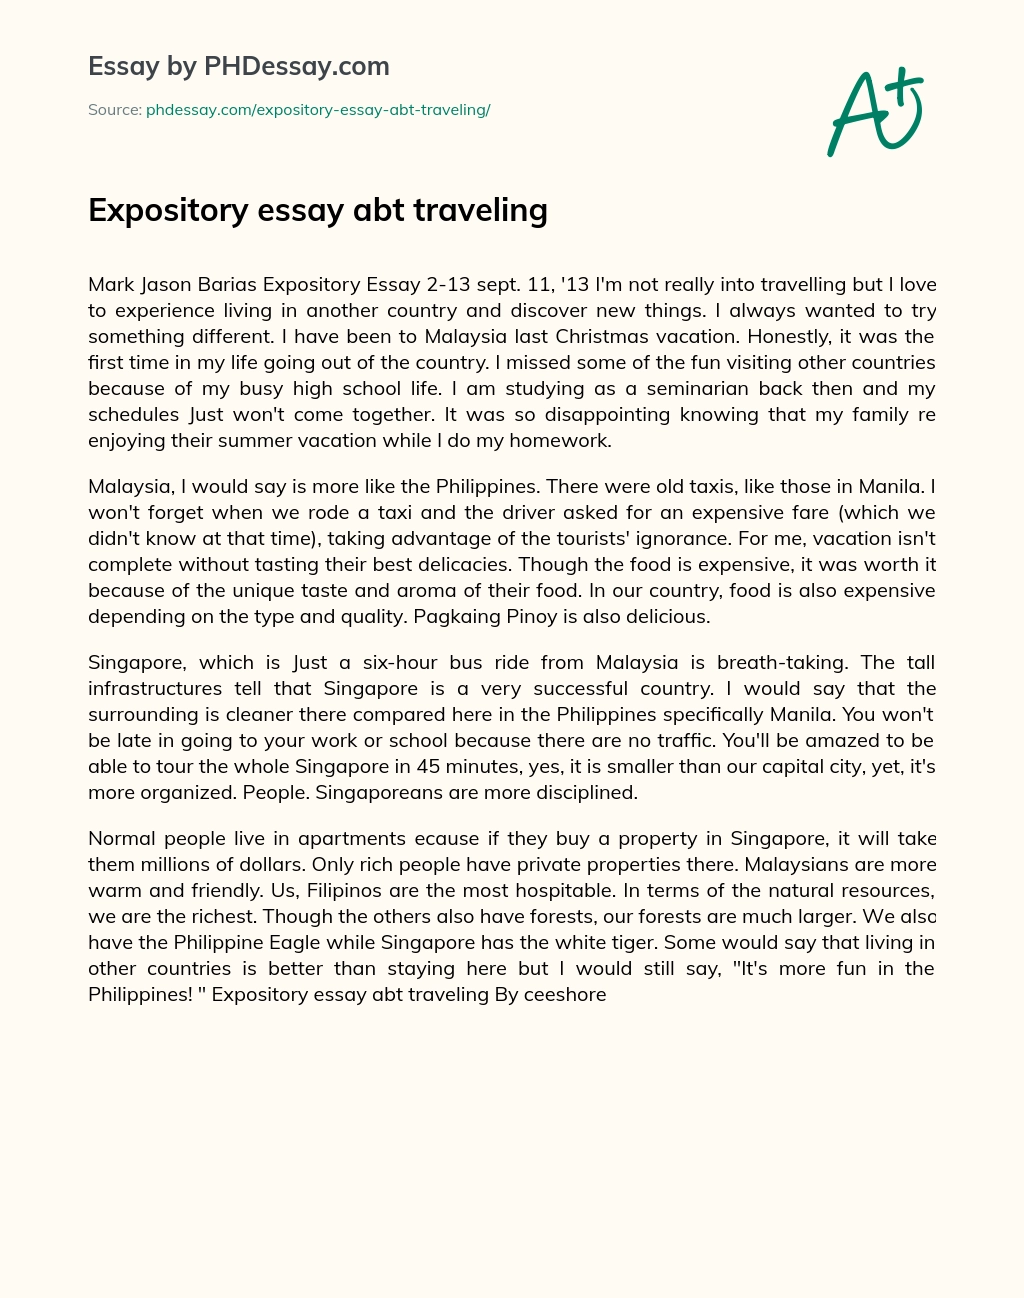 Expository essay abt traveling